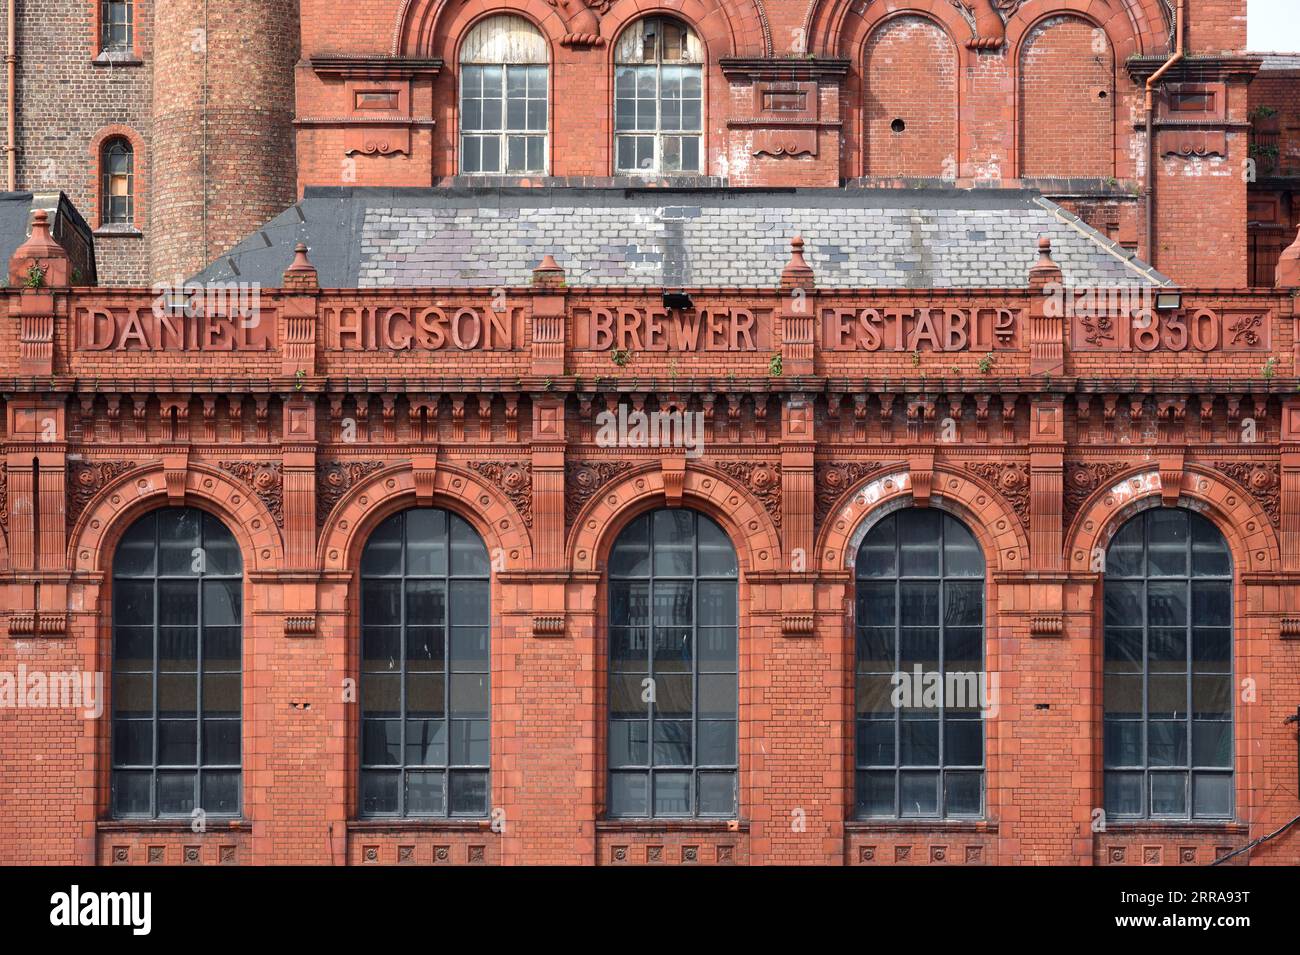 Window Patterns of Redbrick or Red Brick Victorian Achitecture of Higsons Brewery, or Daniel Higson Brewer, Liverpool Stock Photo